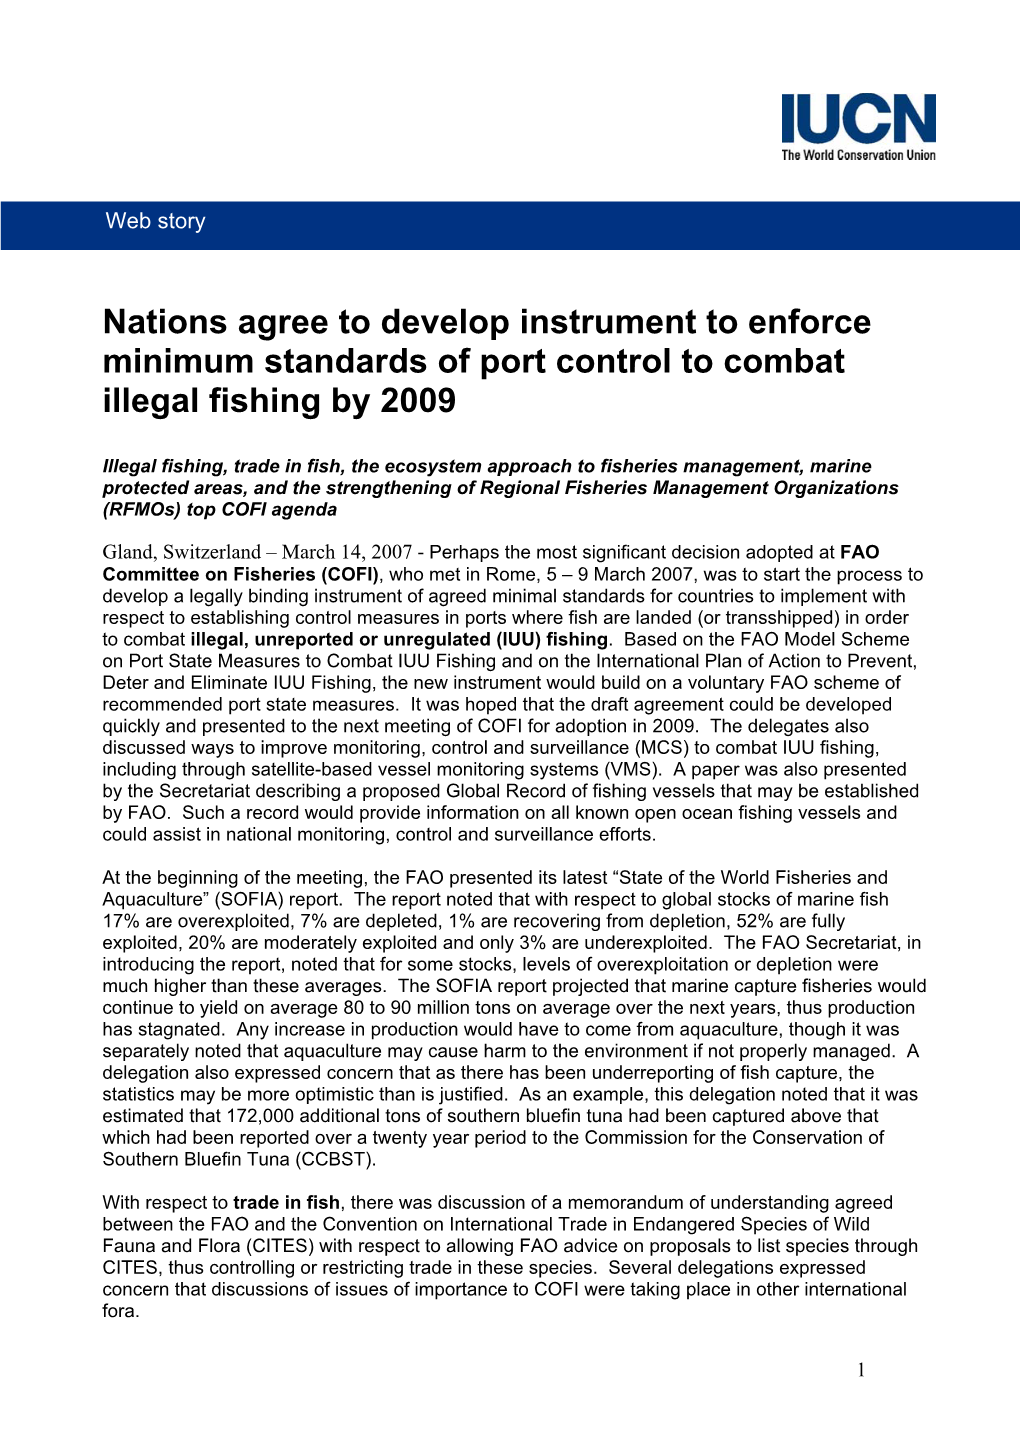 Nations Agree to Develop Instrument to Enforce Minimum Standards of Port Control to Combat Illegal Fishing by 2009